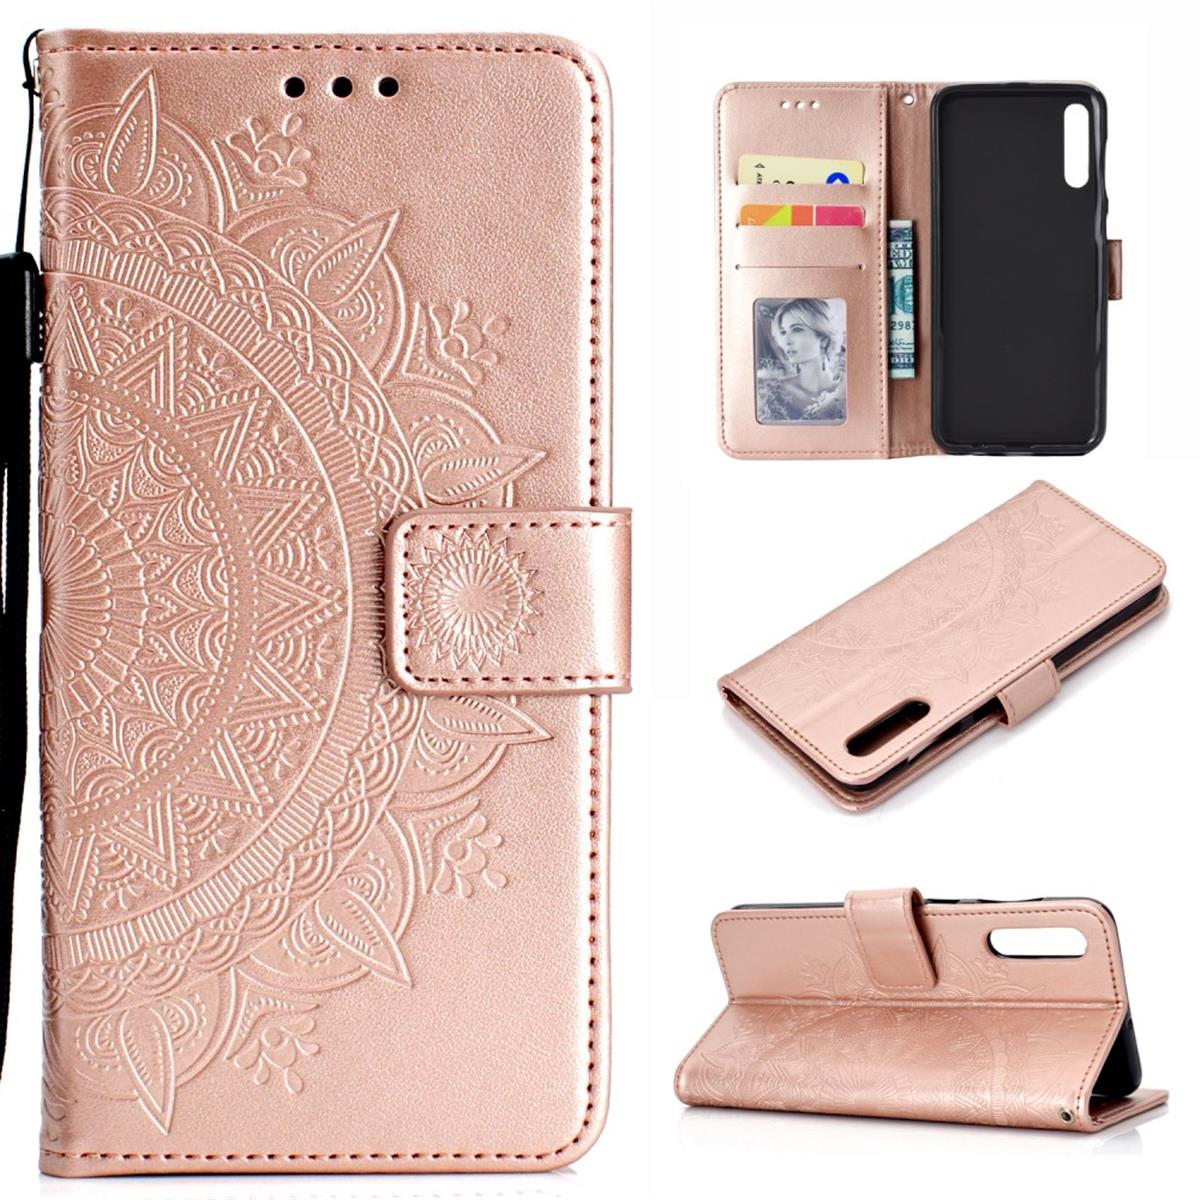 Galaxy Klapphülle COVERKINGZ mit Samsung, Mandala Bookcover, Roségold A70, Muster,